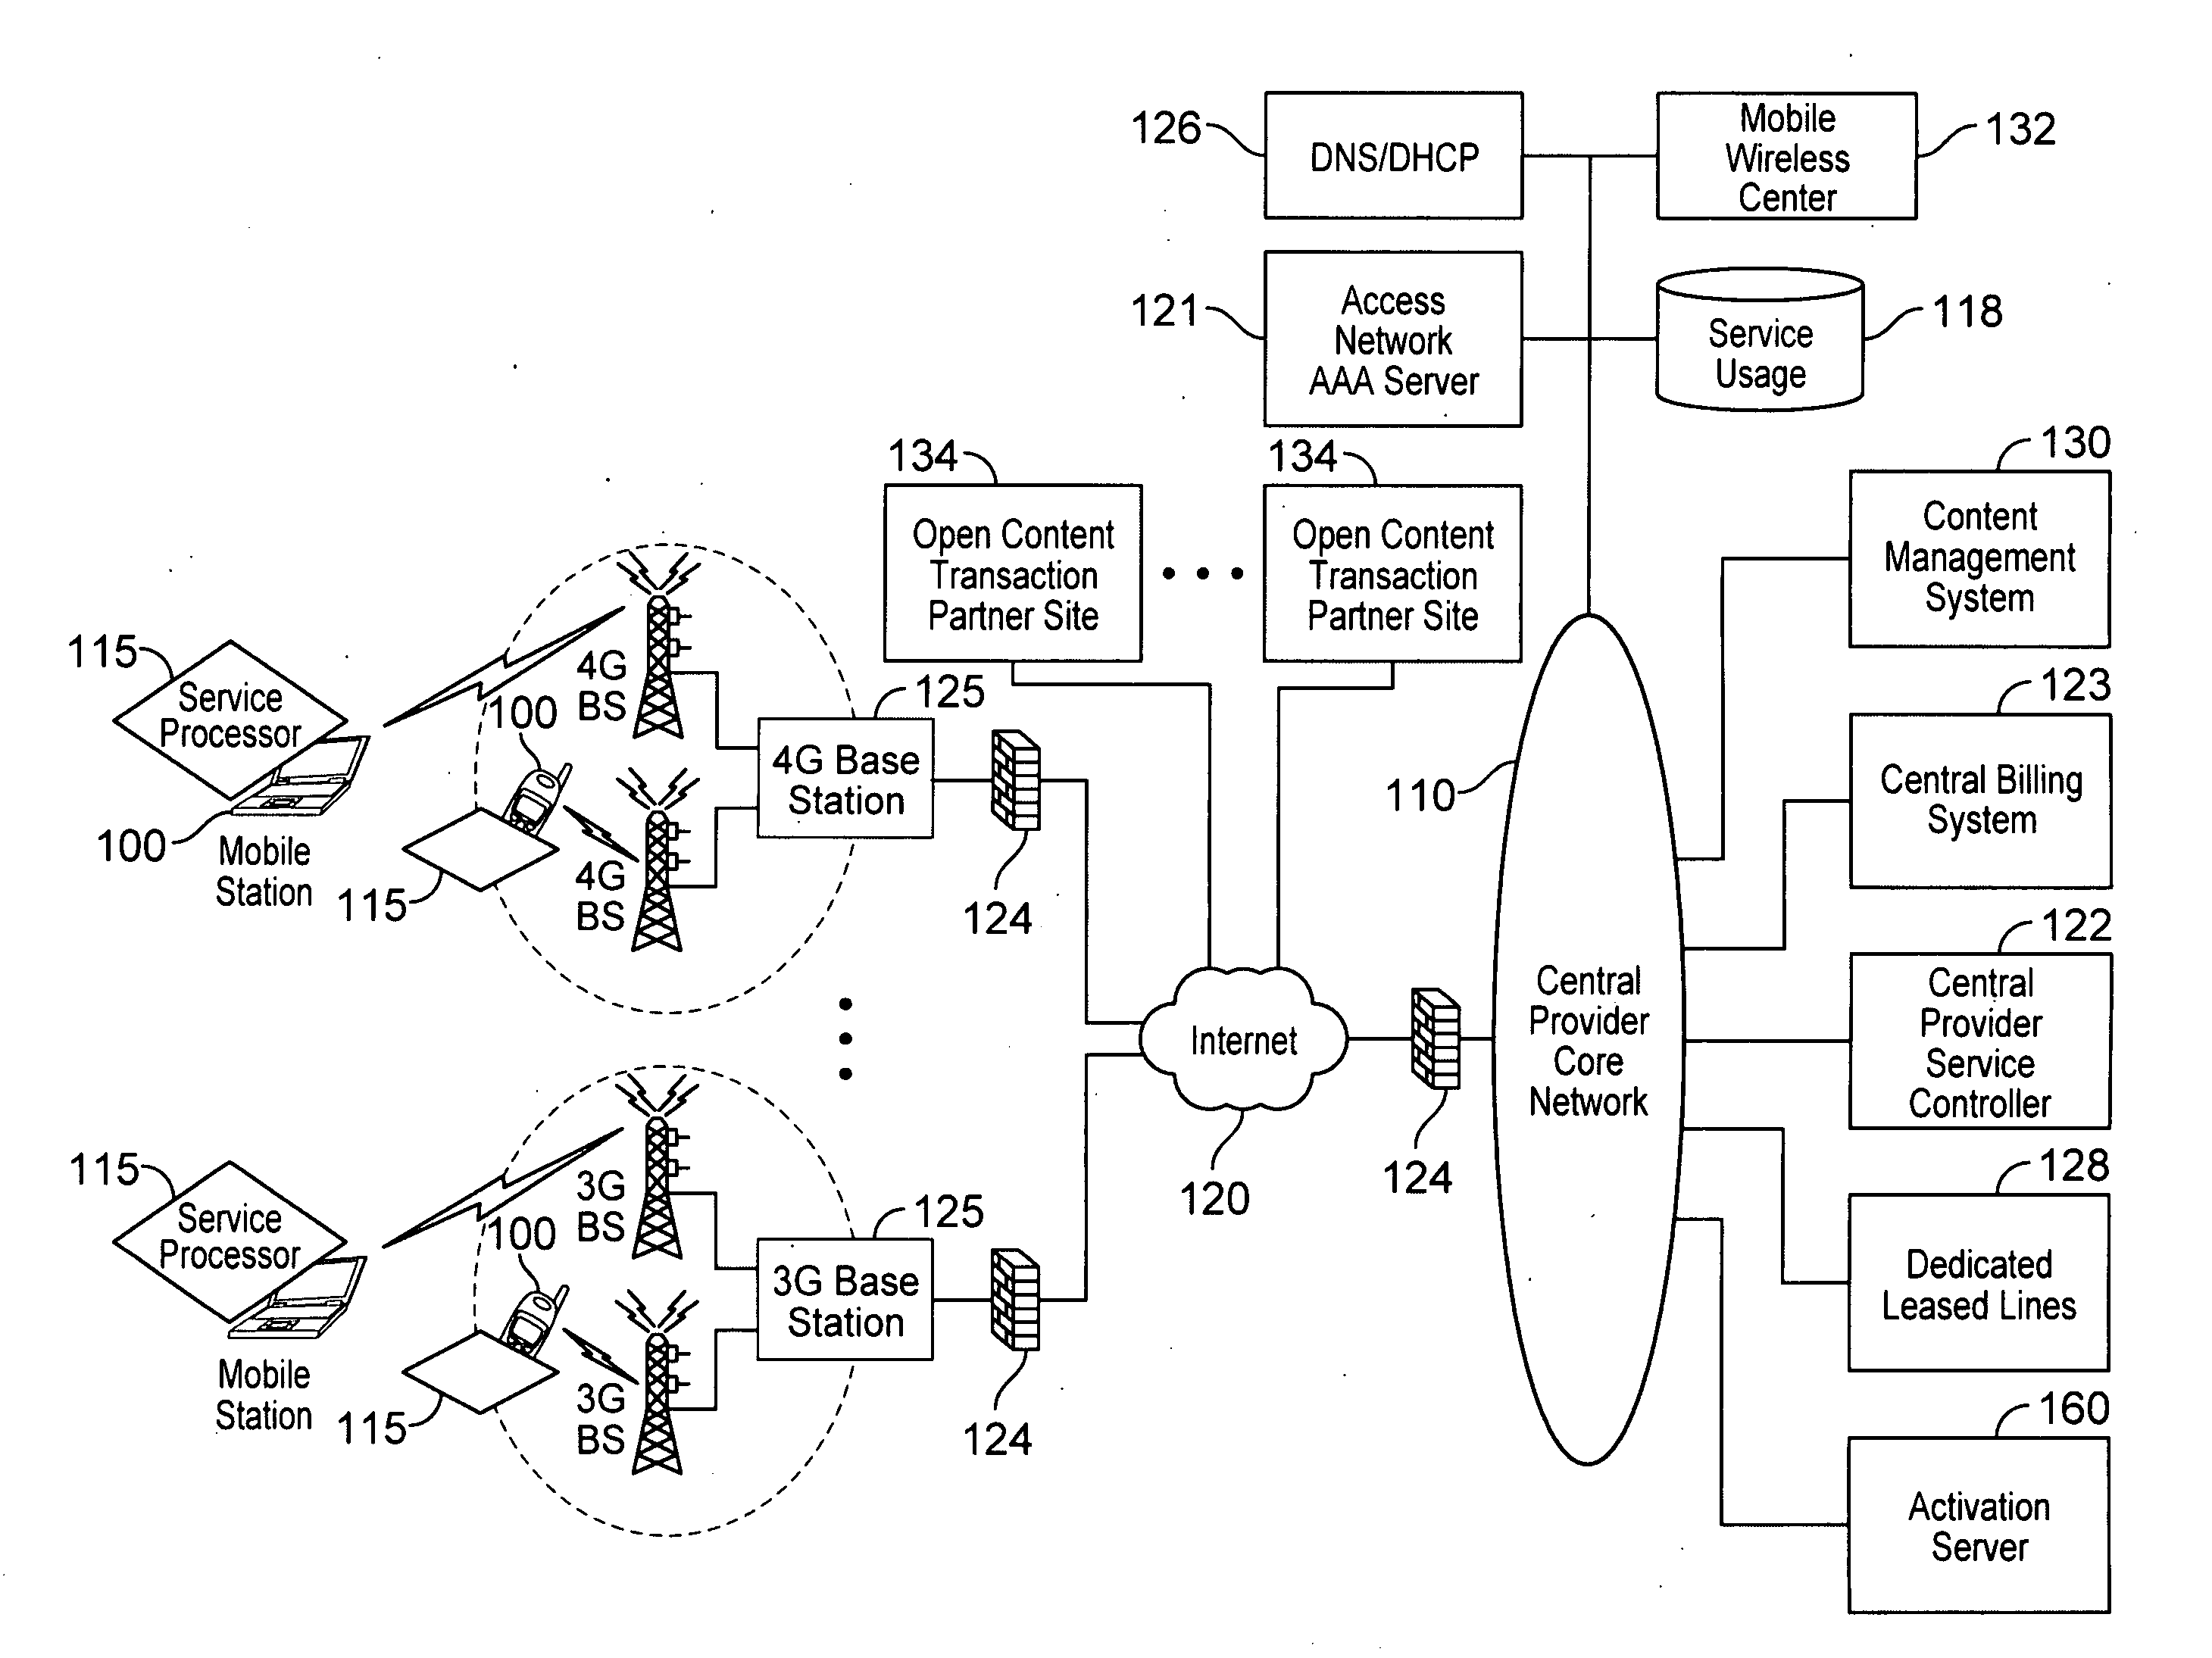 Device assisted service profile management with user preference, adaptive policy, network neutrality, and user privacy